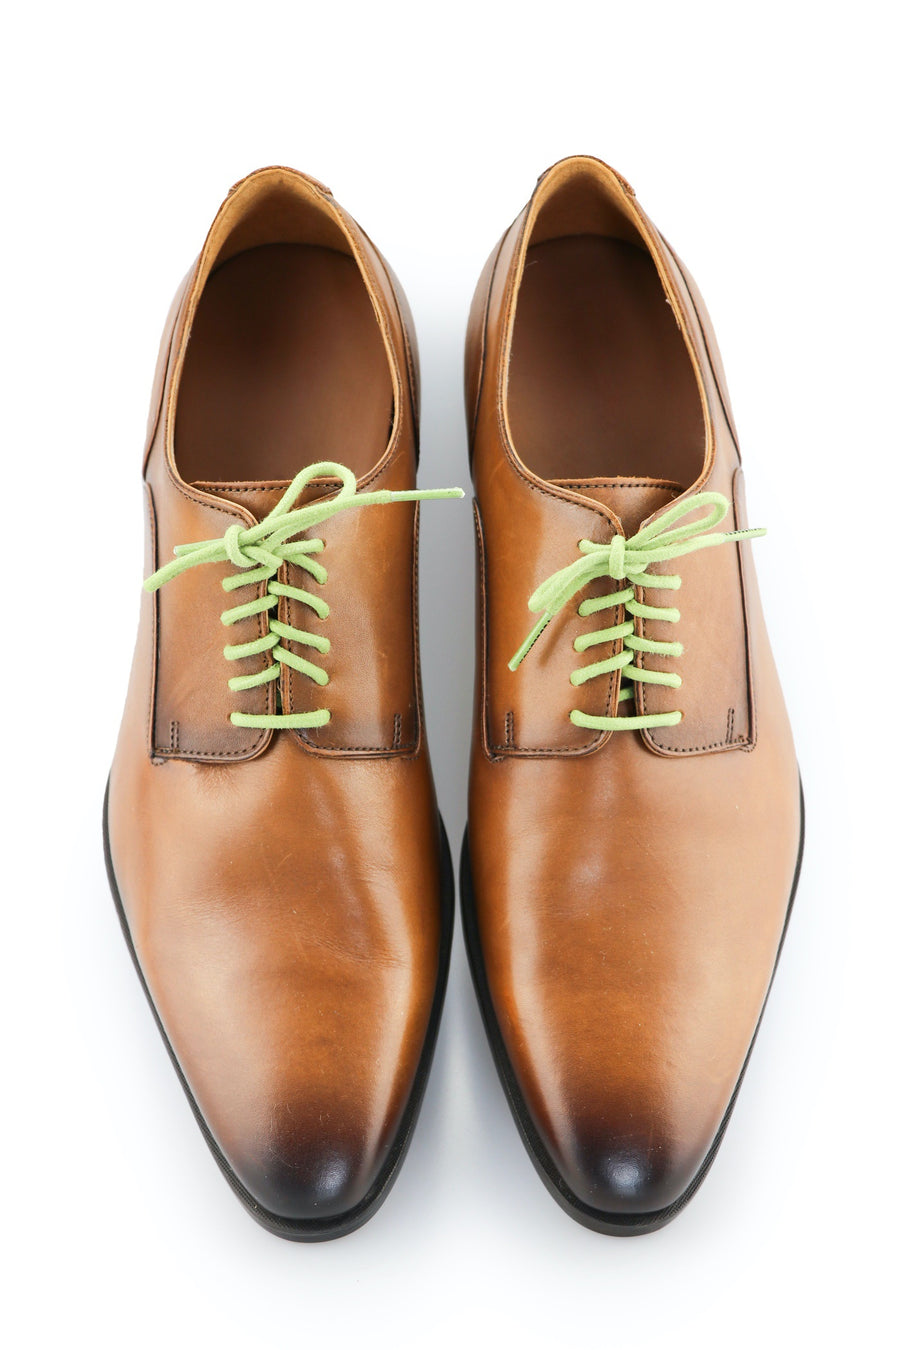 Shoe Laces Apple Green Waxed Cotton Ted and Lemon